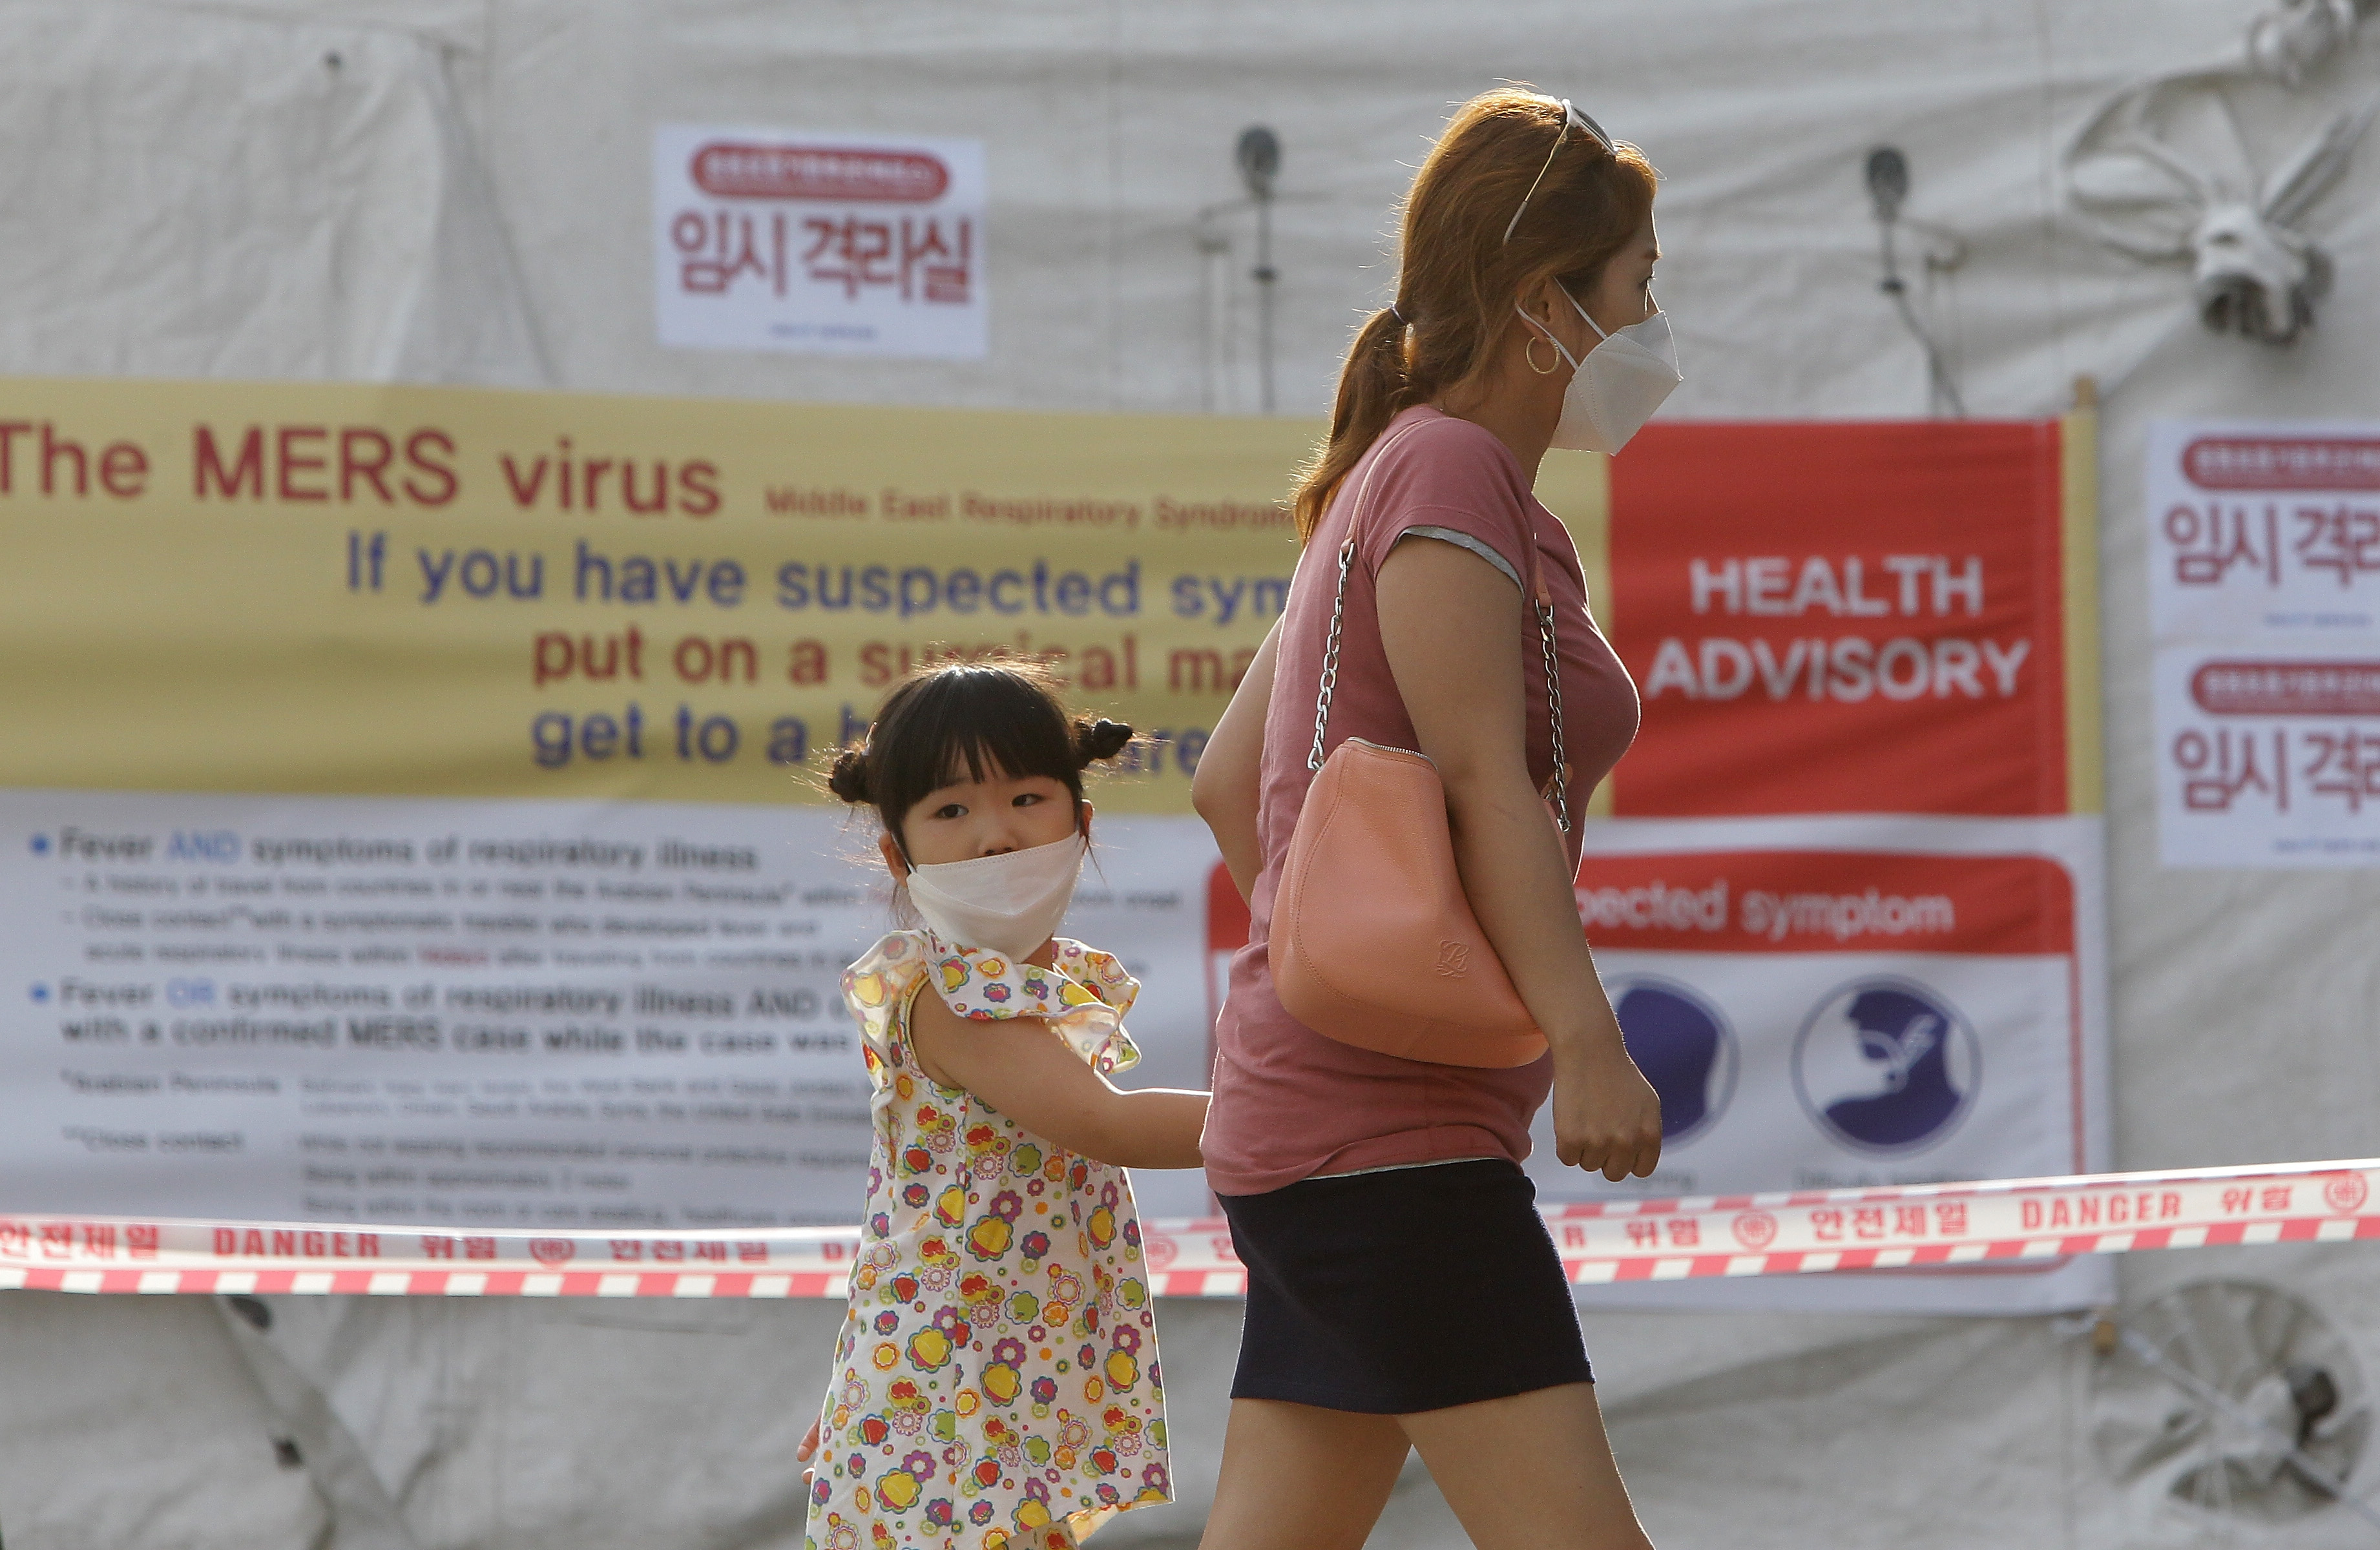 Visitors wearing masks walk in front of a health advisory sign about the MERS virus at a quarantine tent for people who could be infected with the MERS virus at Seoul National University Hospital on June 2 in Seoul, South Korea. (Chung Sung-Jun&mdash;2015 Getty Images)